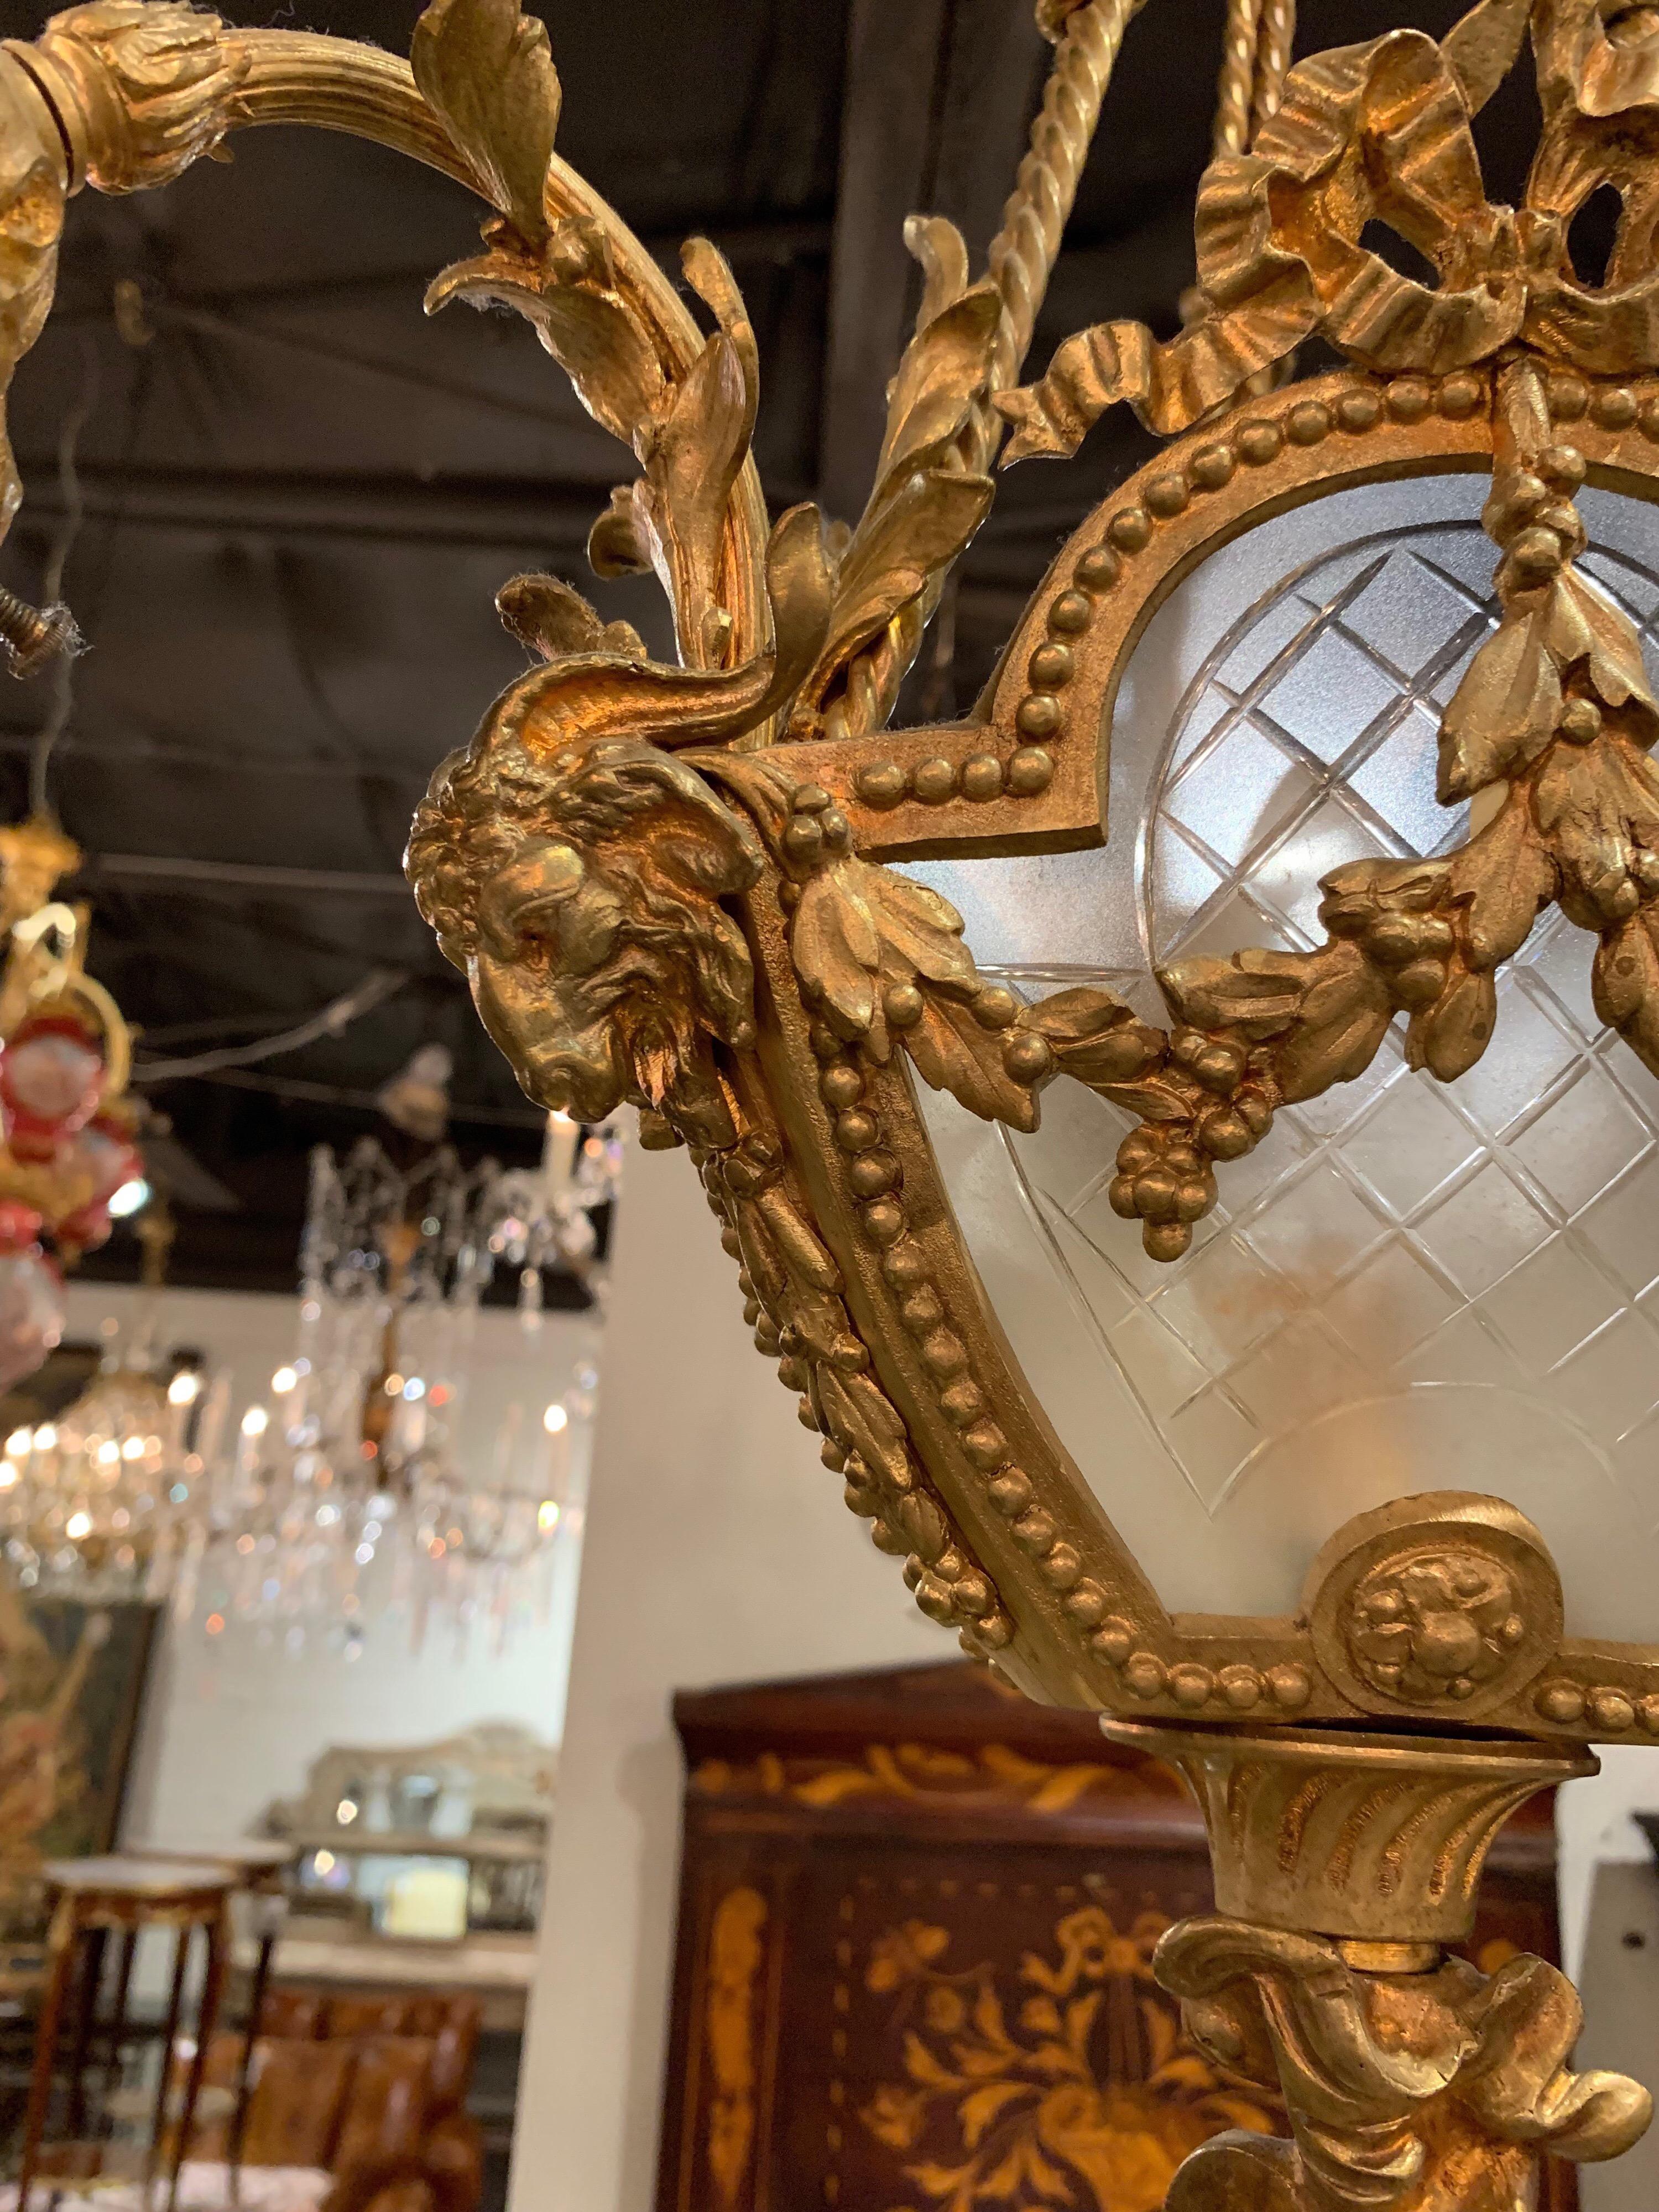 Beautiful petite French Belle Époque bronze 4-light chandelier. Very fine detail on the bronze with images including rope tassels, bows and rams. The fixture has frosted glasses shades and globe as well. A totally unique piece. Comes with a canopy